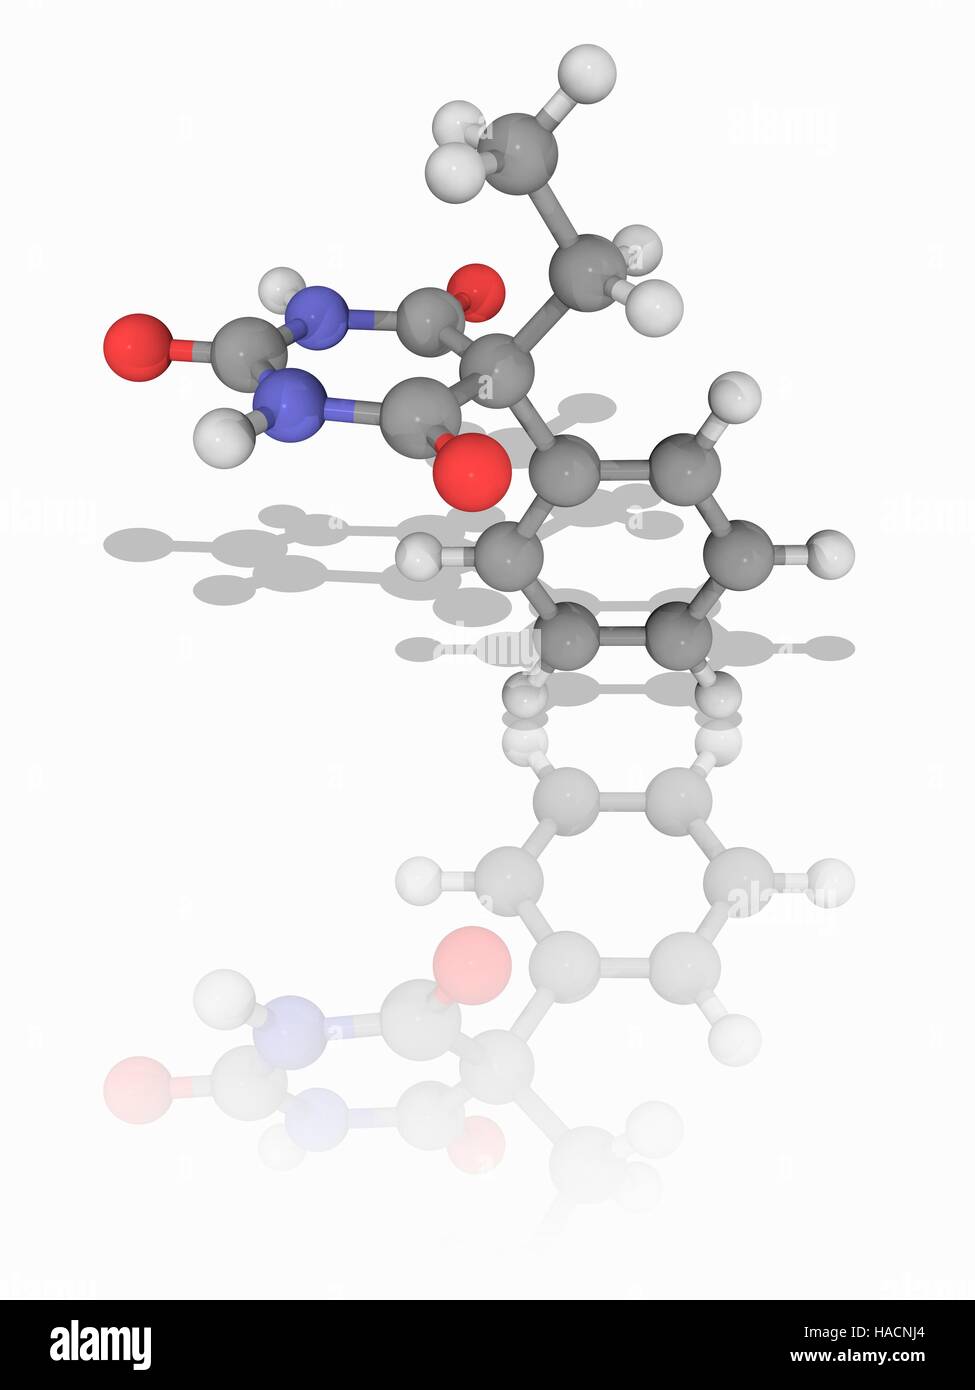 Phenobarbital. Molecular model of the barbiturate drug phenobarbital (C12.H12.N2.O3), used to treat all types of seizures except absence seizures. Atoms are represented as spheres and are colour-coded: carbon (grey), hydrogen (white), nitrogen (blue) and oxygen (red). Illustration. Stock Photo